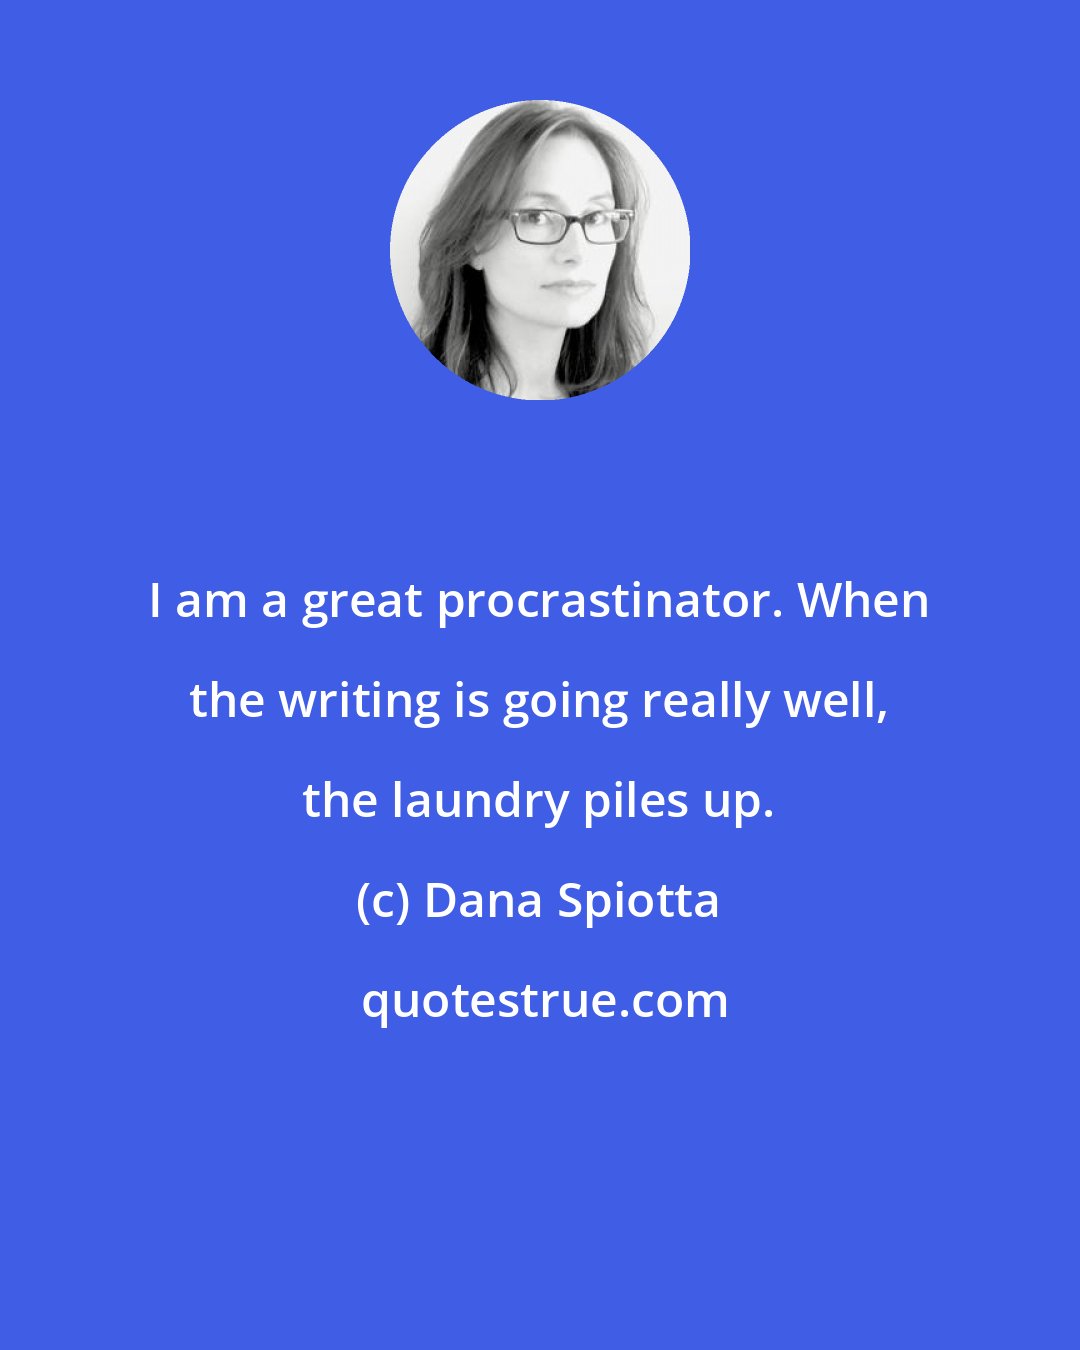 Dana Spiotta: I am a great procrastinator. When the writing is going really well, the laundry piles up.